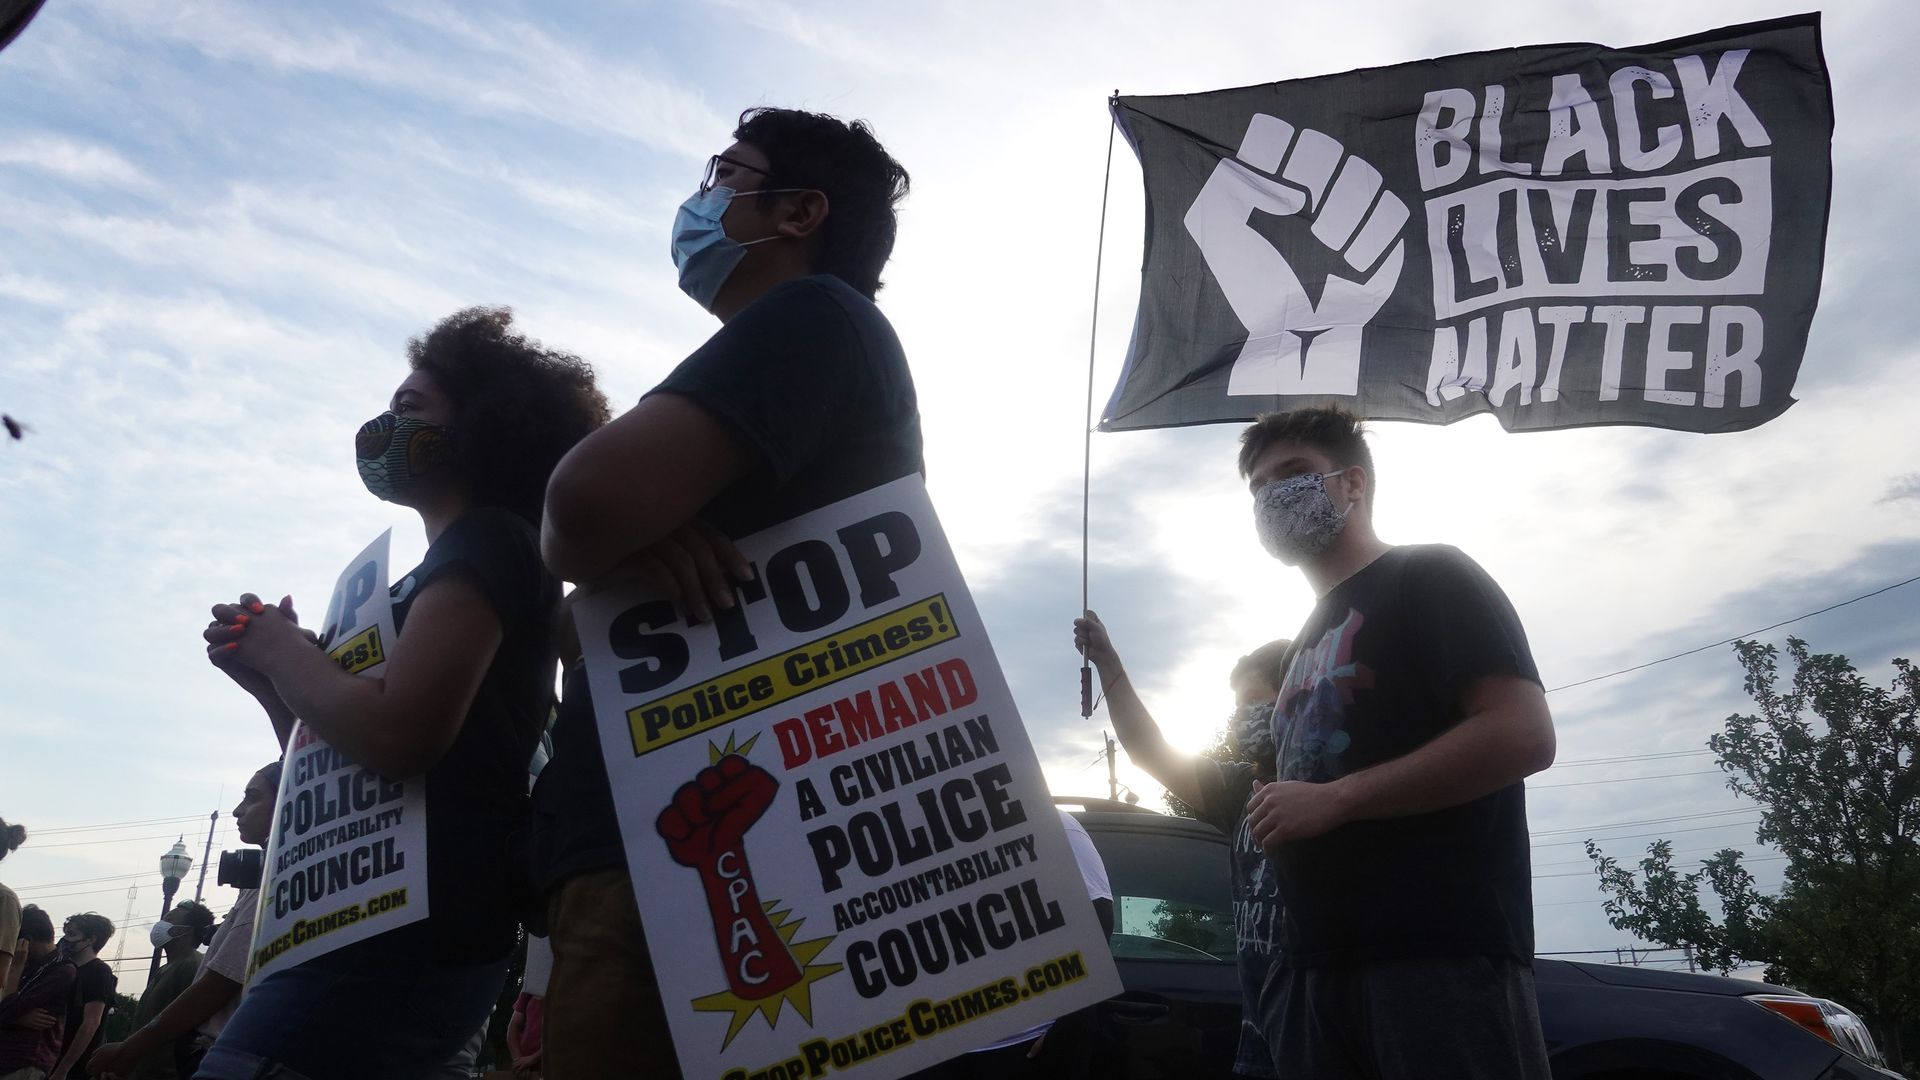 Four protesters of different races, all wearing face masks and black shirts, face to the left while holding Black Lives Matter signs. The sun shines brightly behind them in a partly cloudy sky